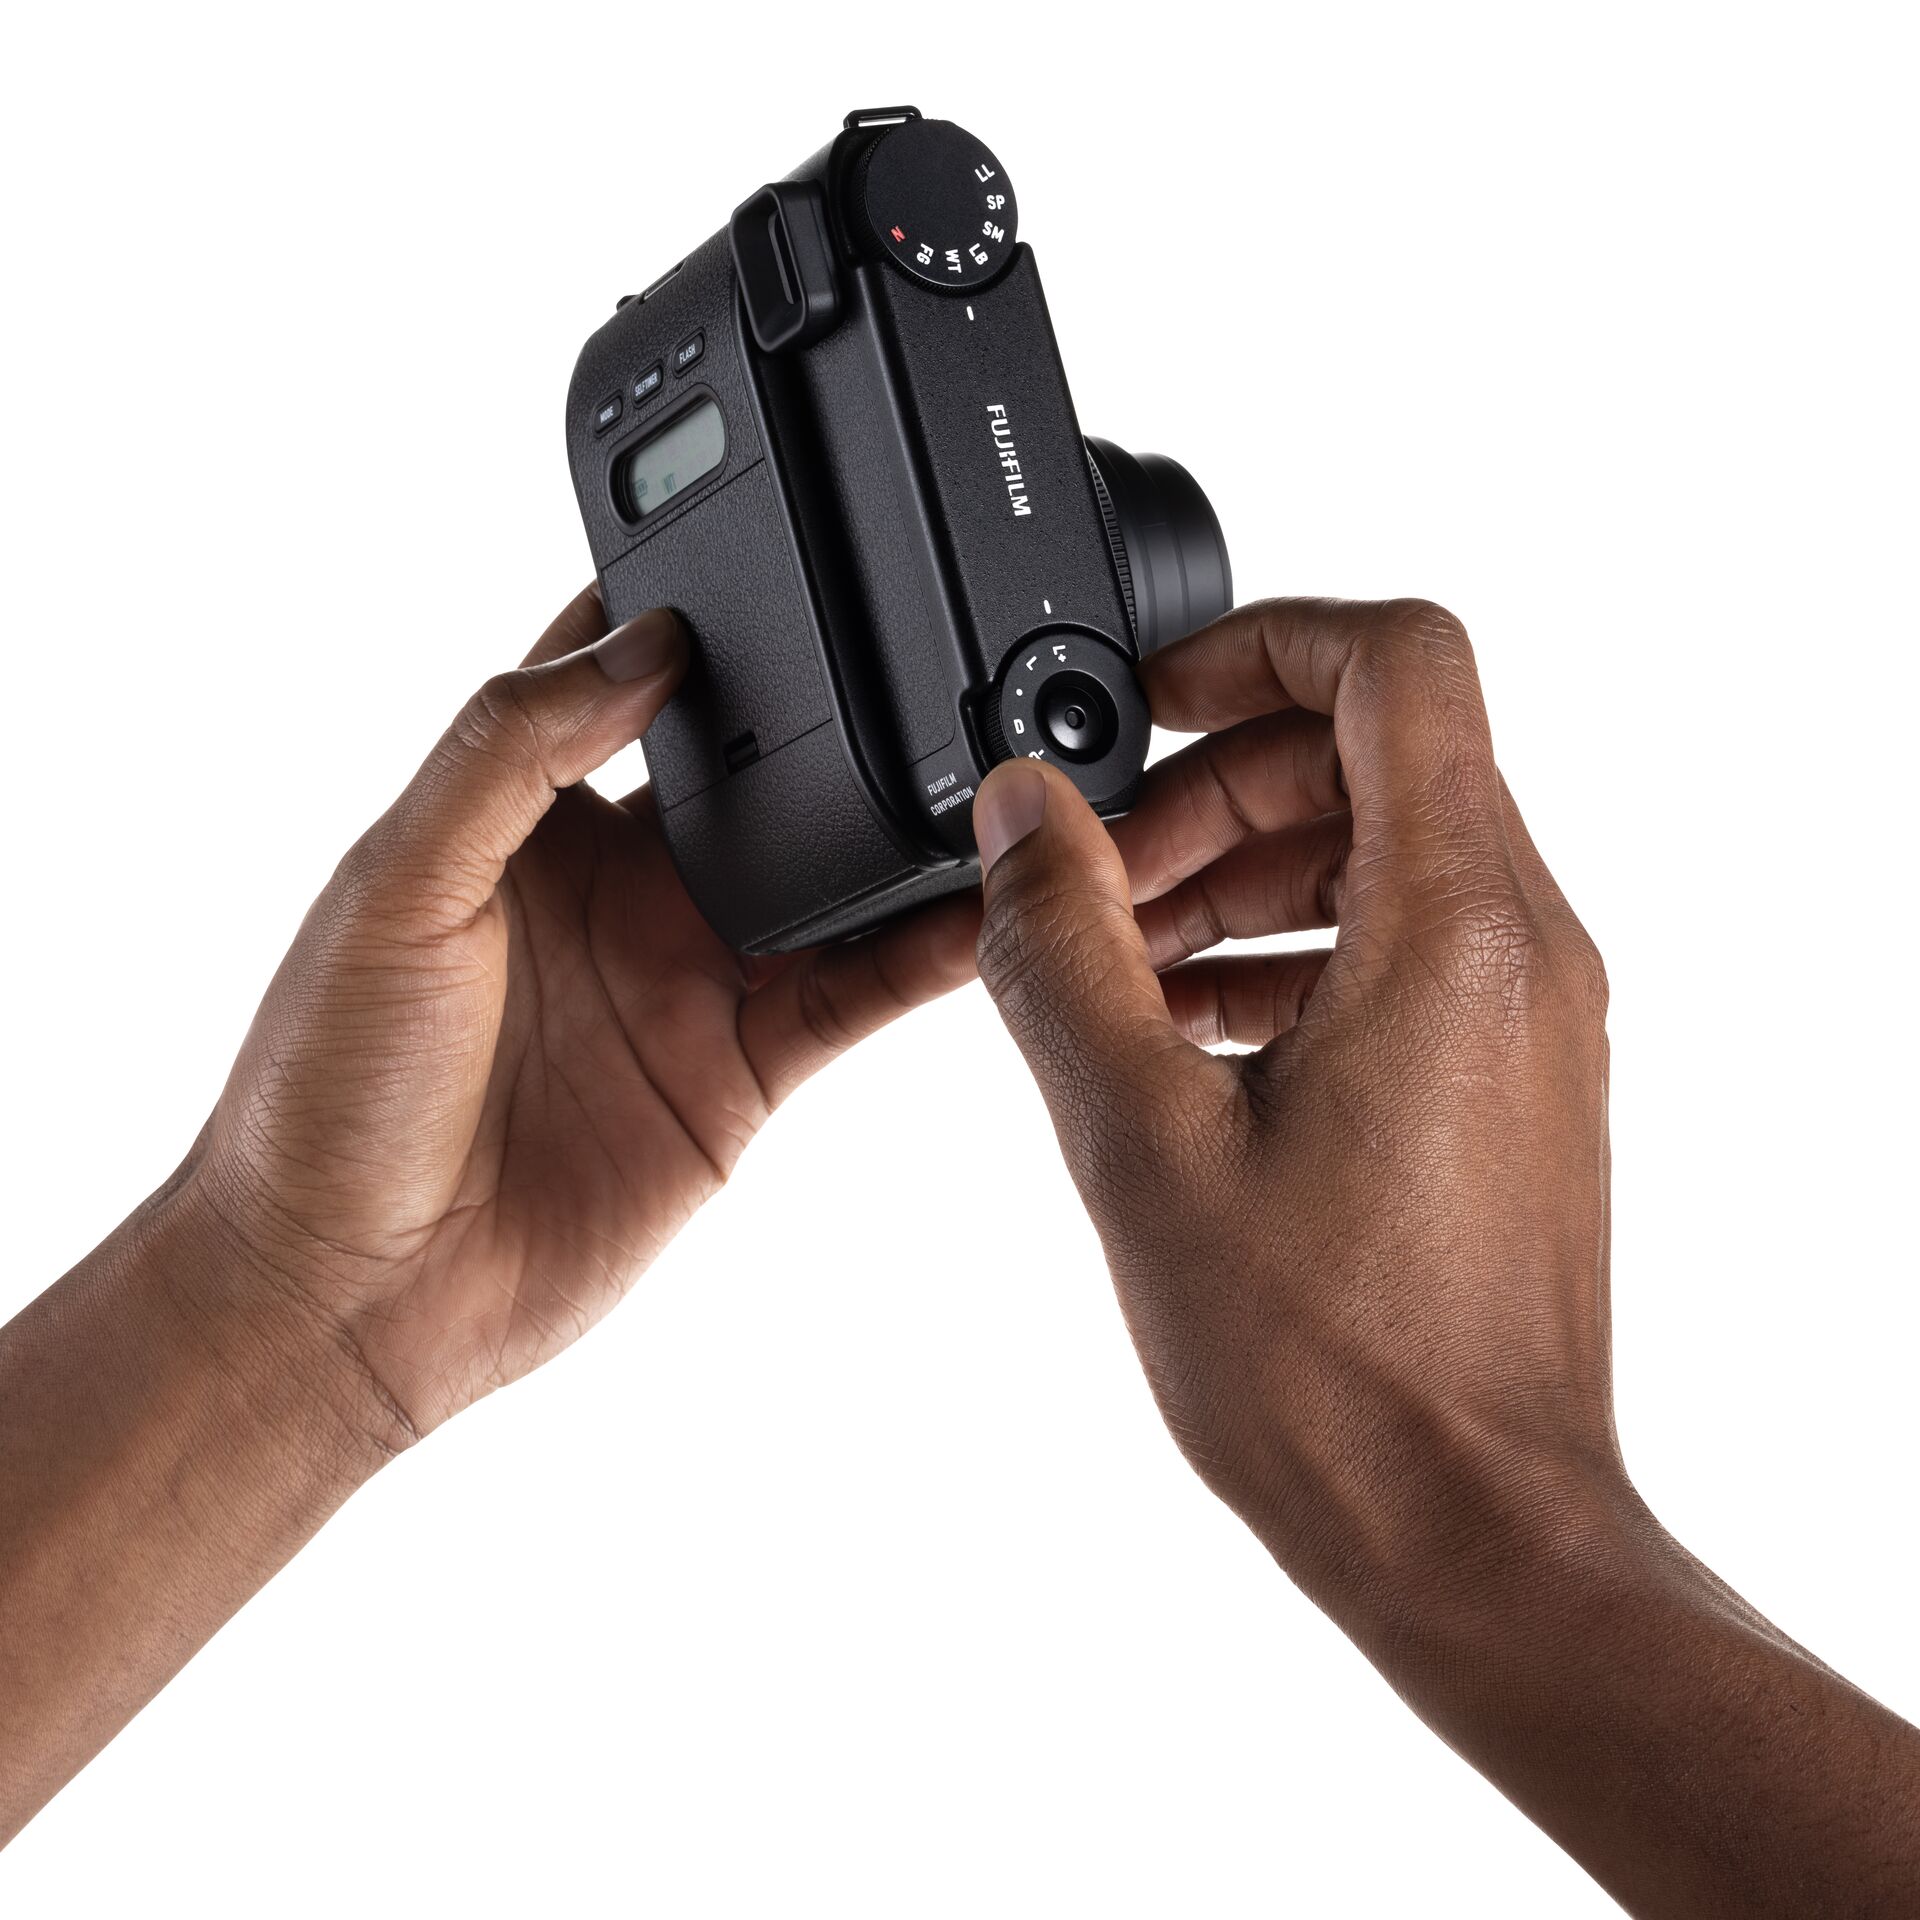 Fujifilm: the INSTAX MINI 99 with rings is coming!